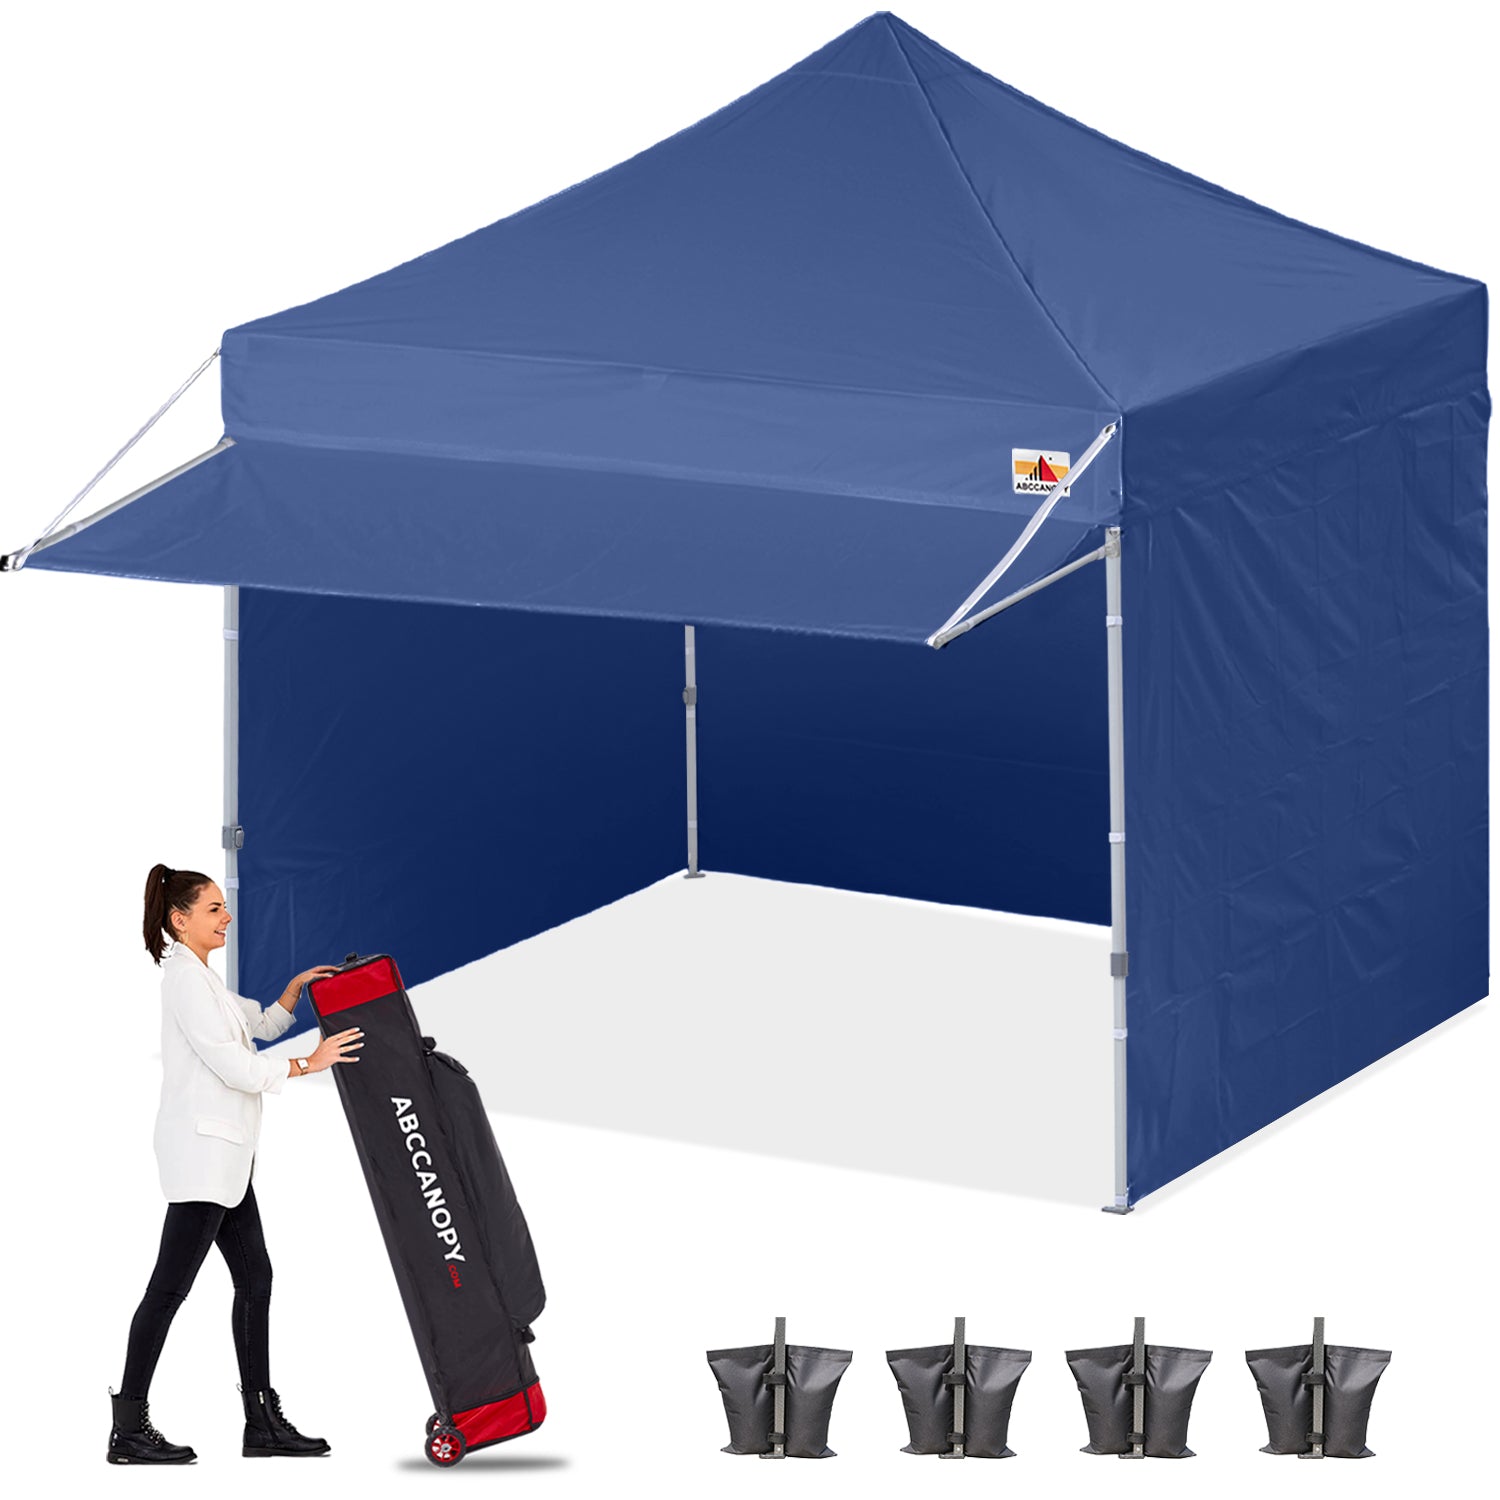 S1 Commercial Pop Up Canopy Tent with Awning and Sidewalls 10x10/10x20